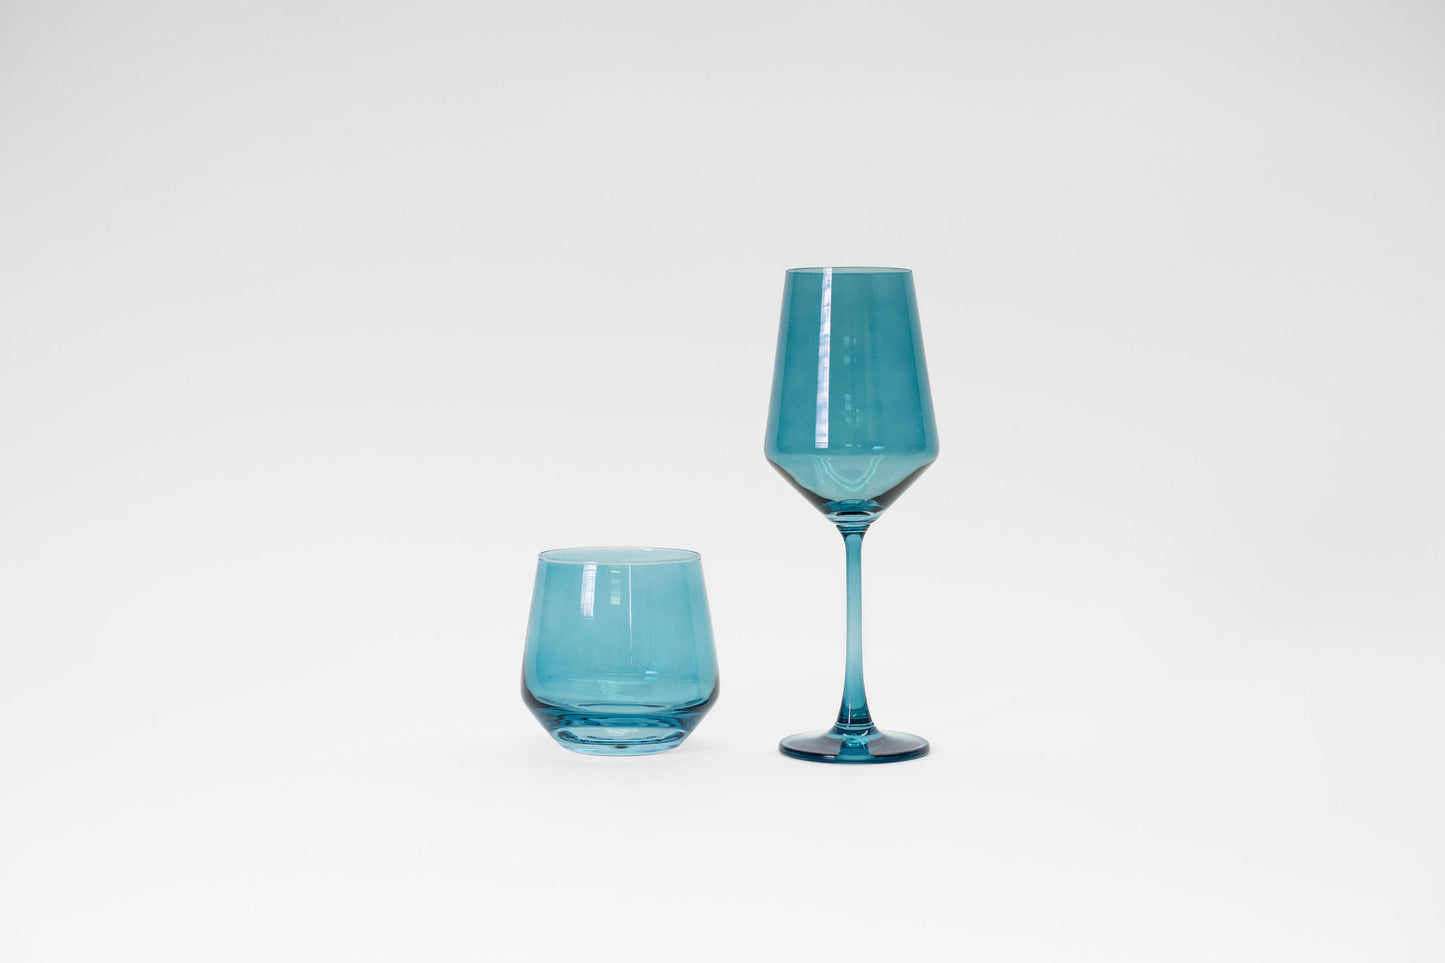 Container Store Set of 4 - Colored Wine Glasses